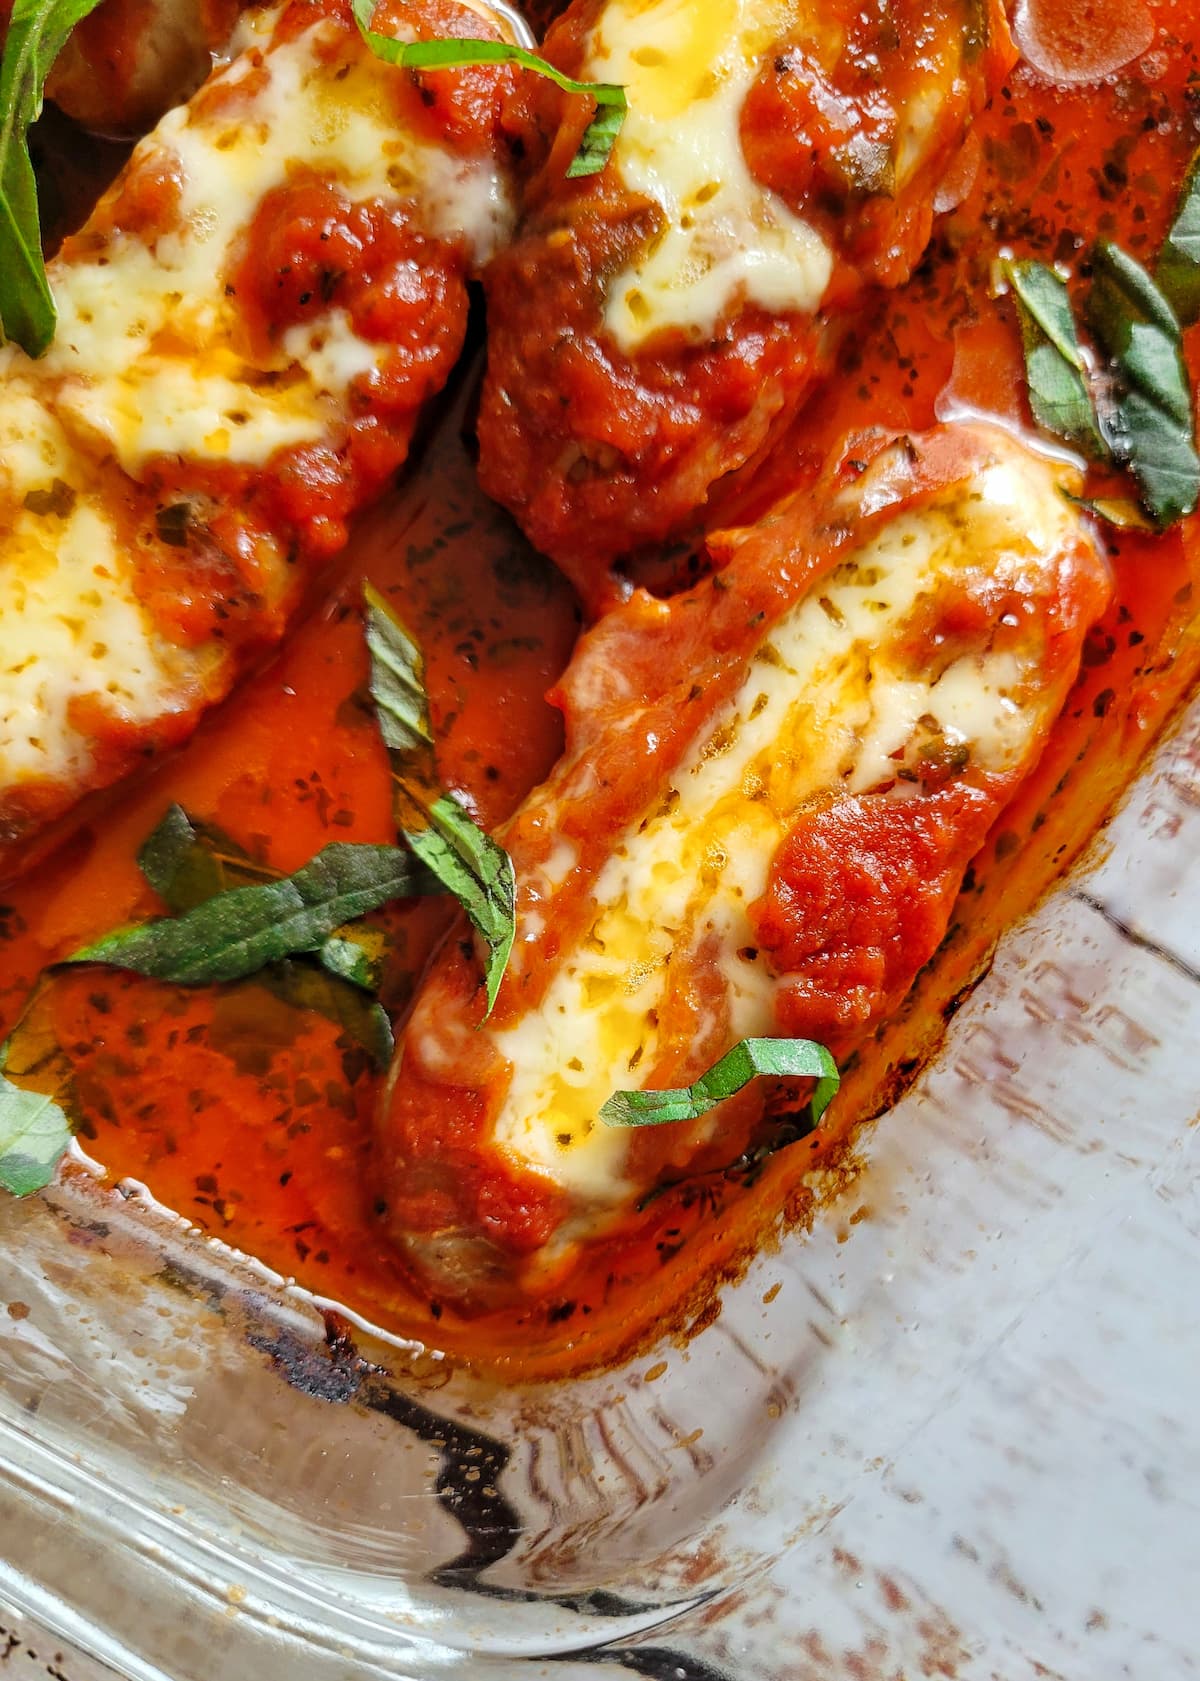 melted cheese stuffed sausages in tomato sauce with fresh basil